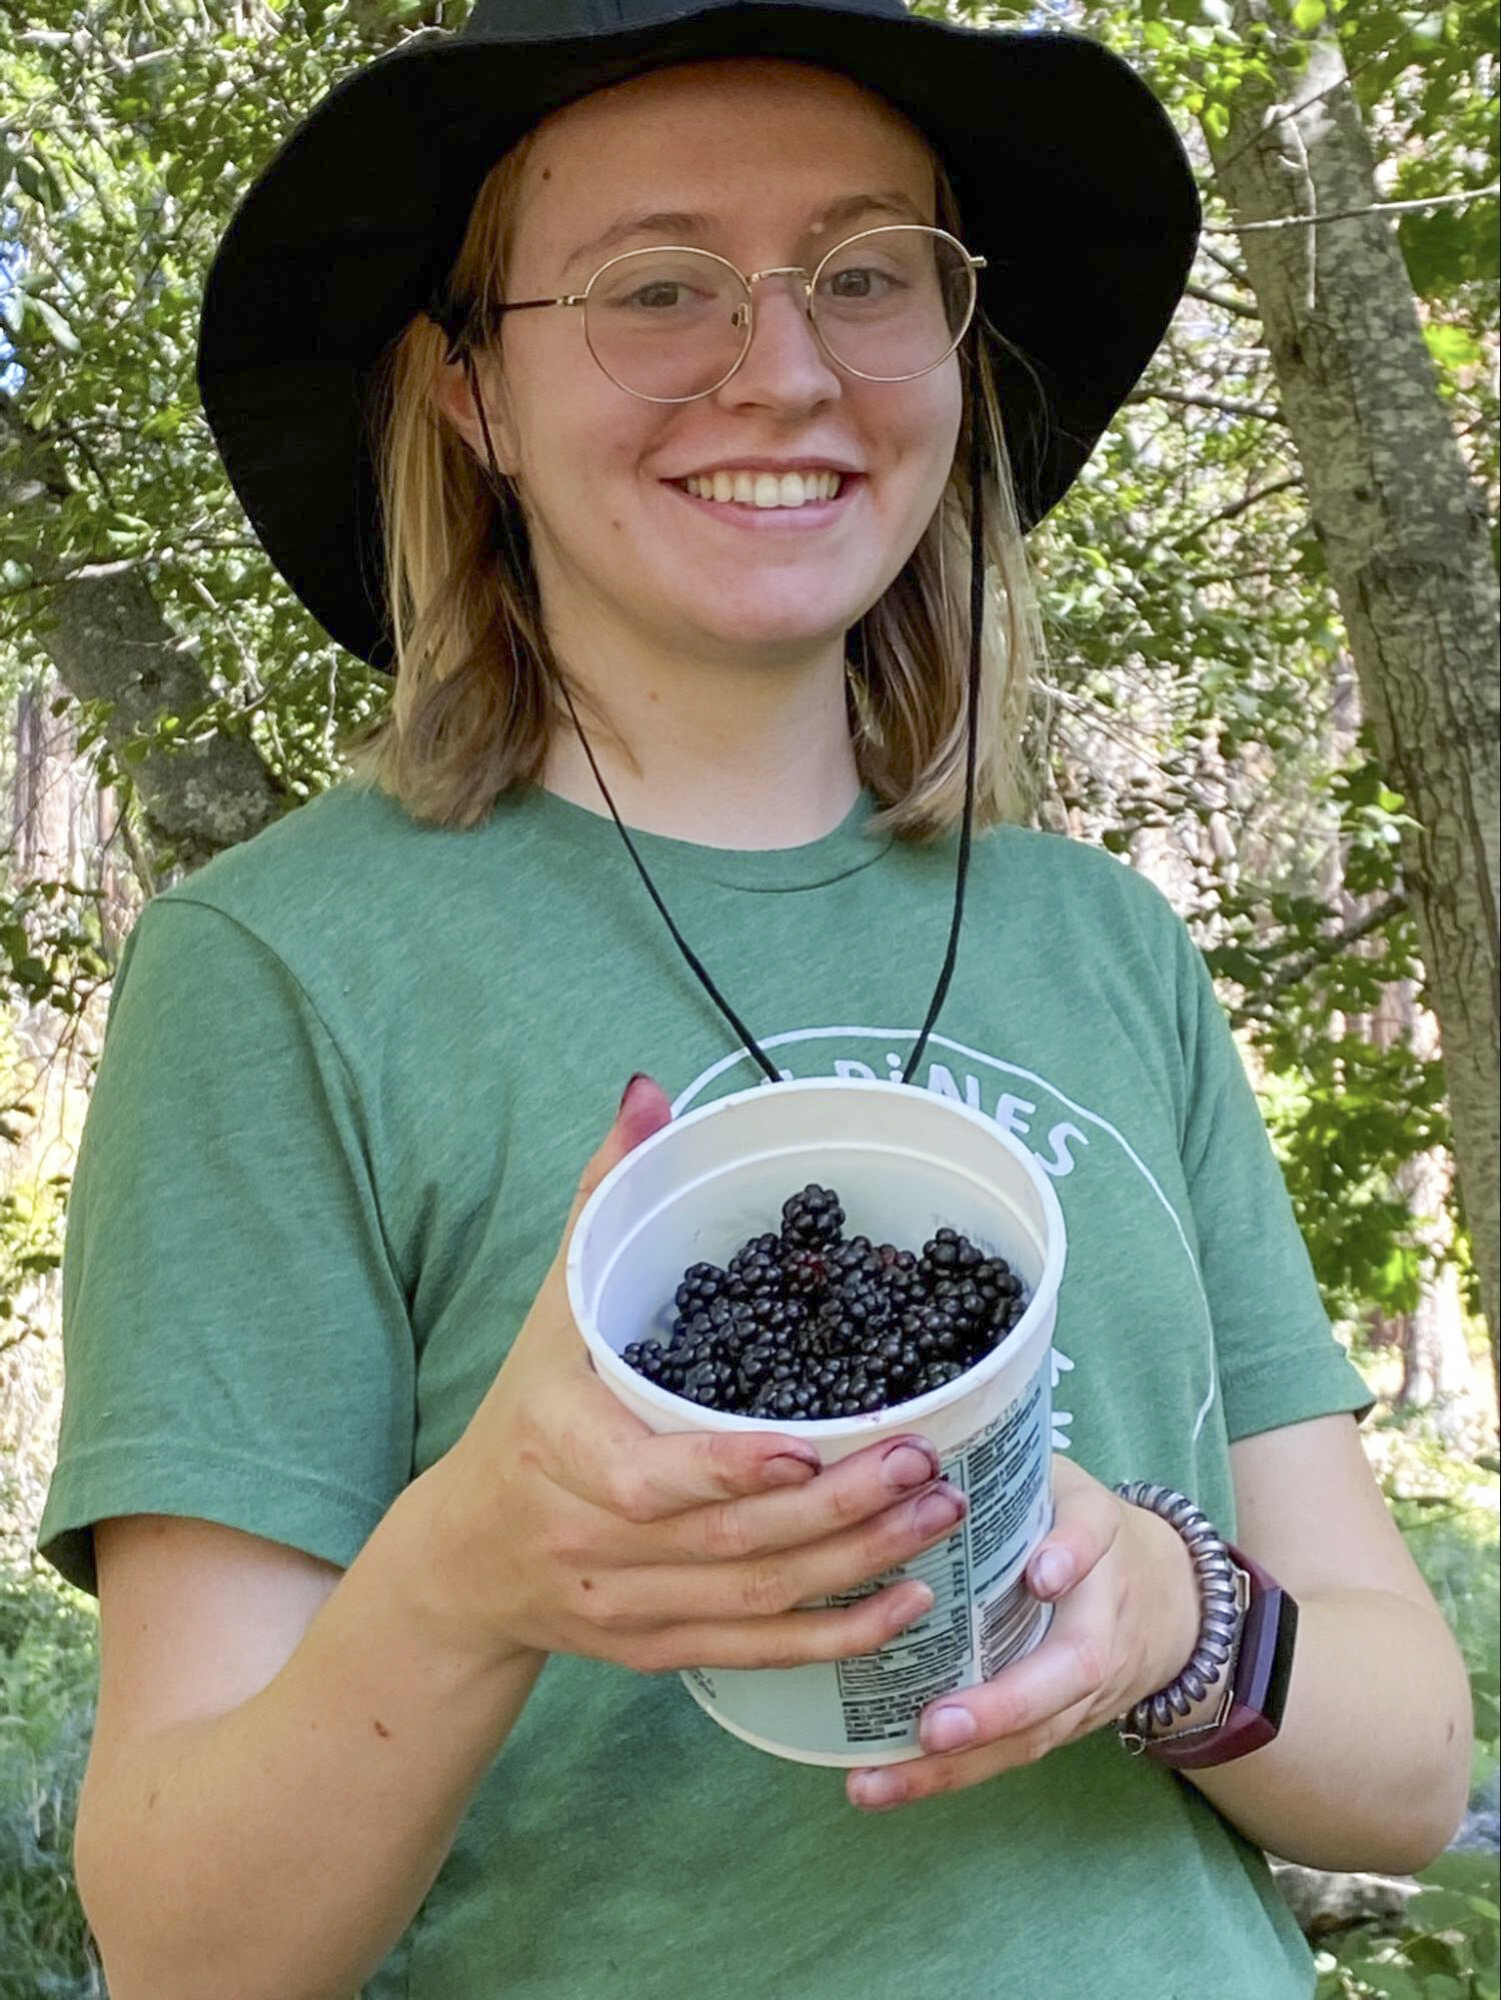 A person with glasses holds a plastic container full of blackberries in a wooded area.